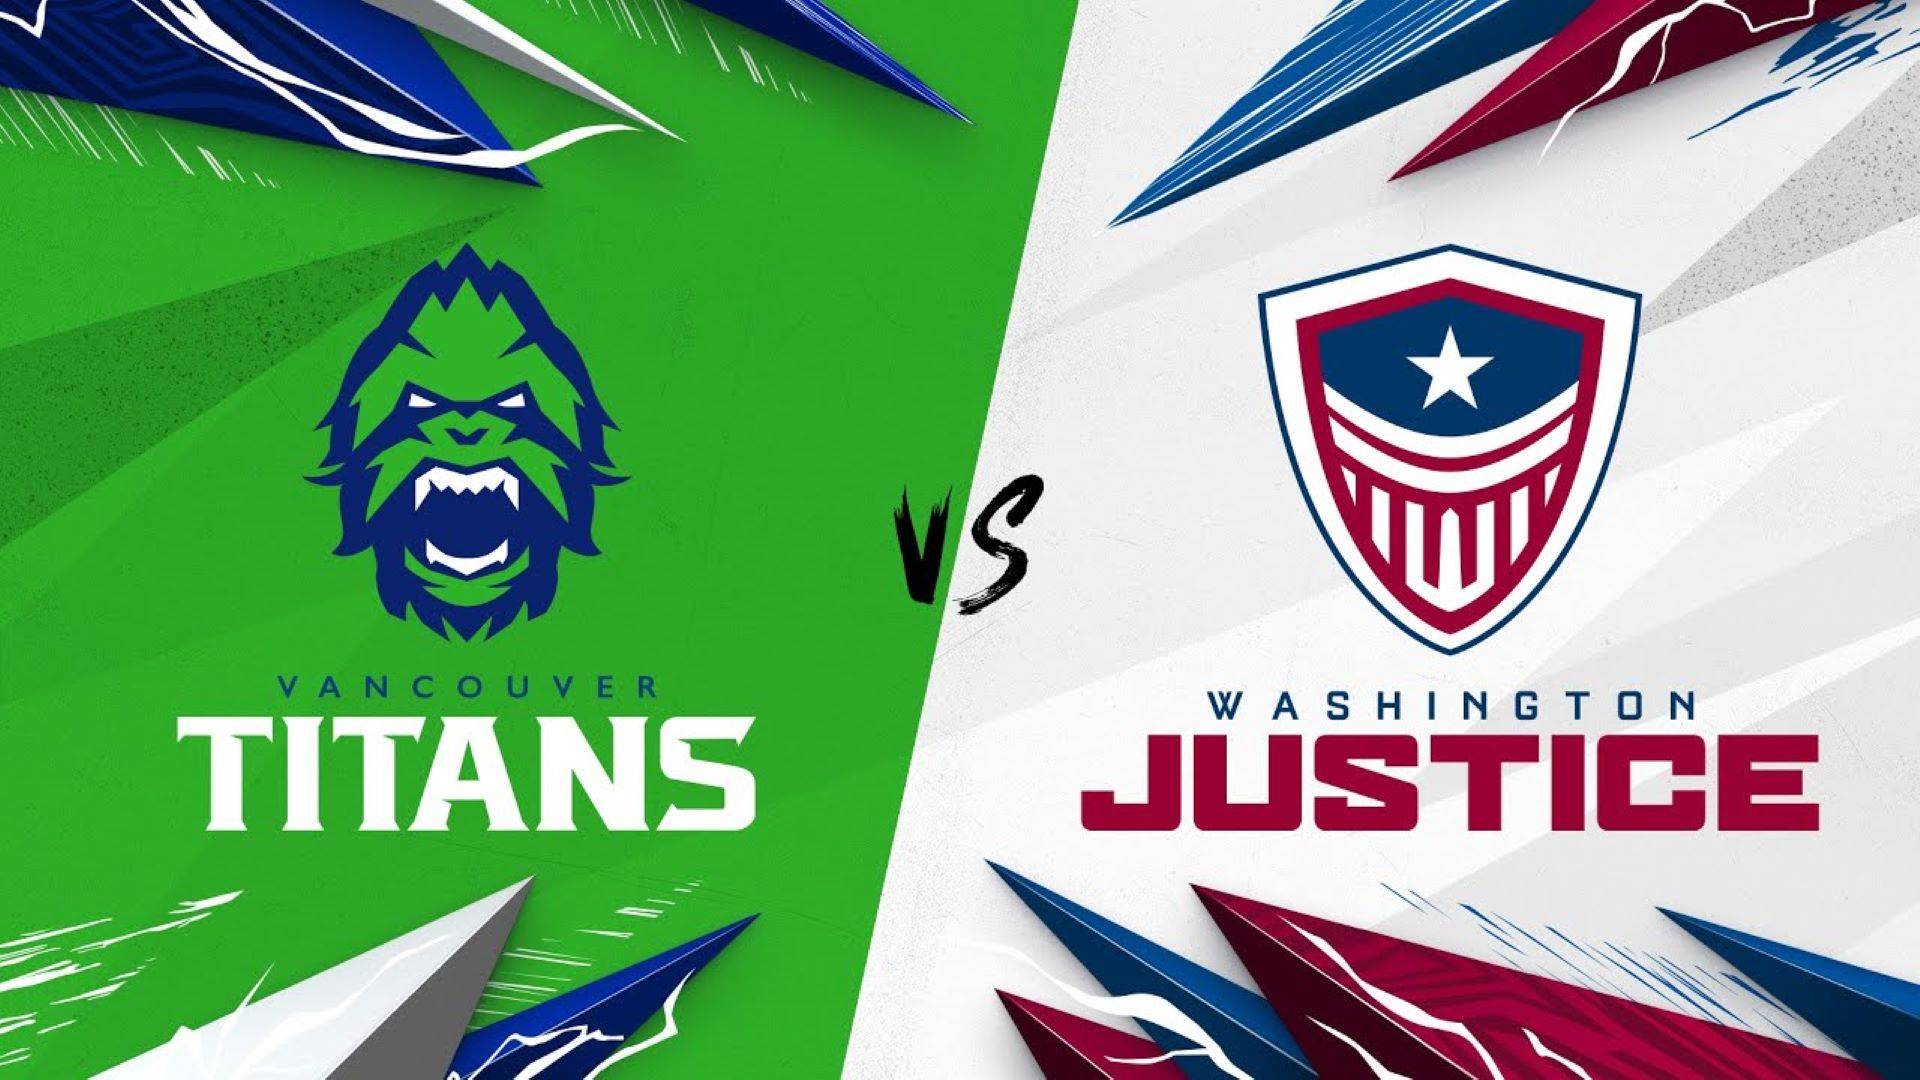 Washington Justice and Vancouver Titans